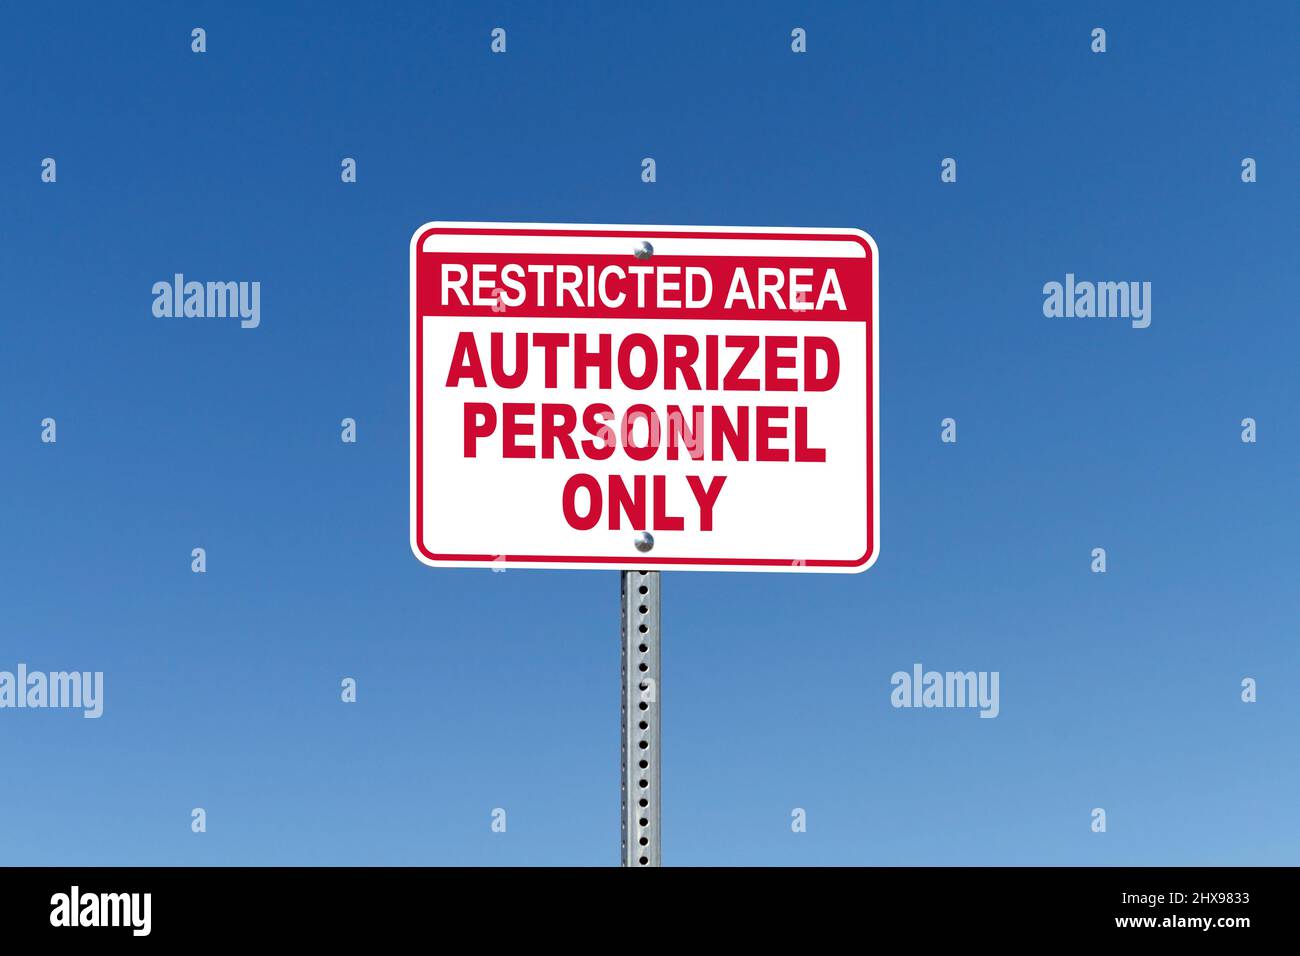 Restricted Area, Authorized Personnel Only, street sign with blue sky background Stock Photo